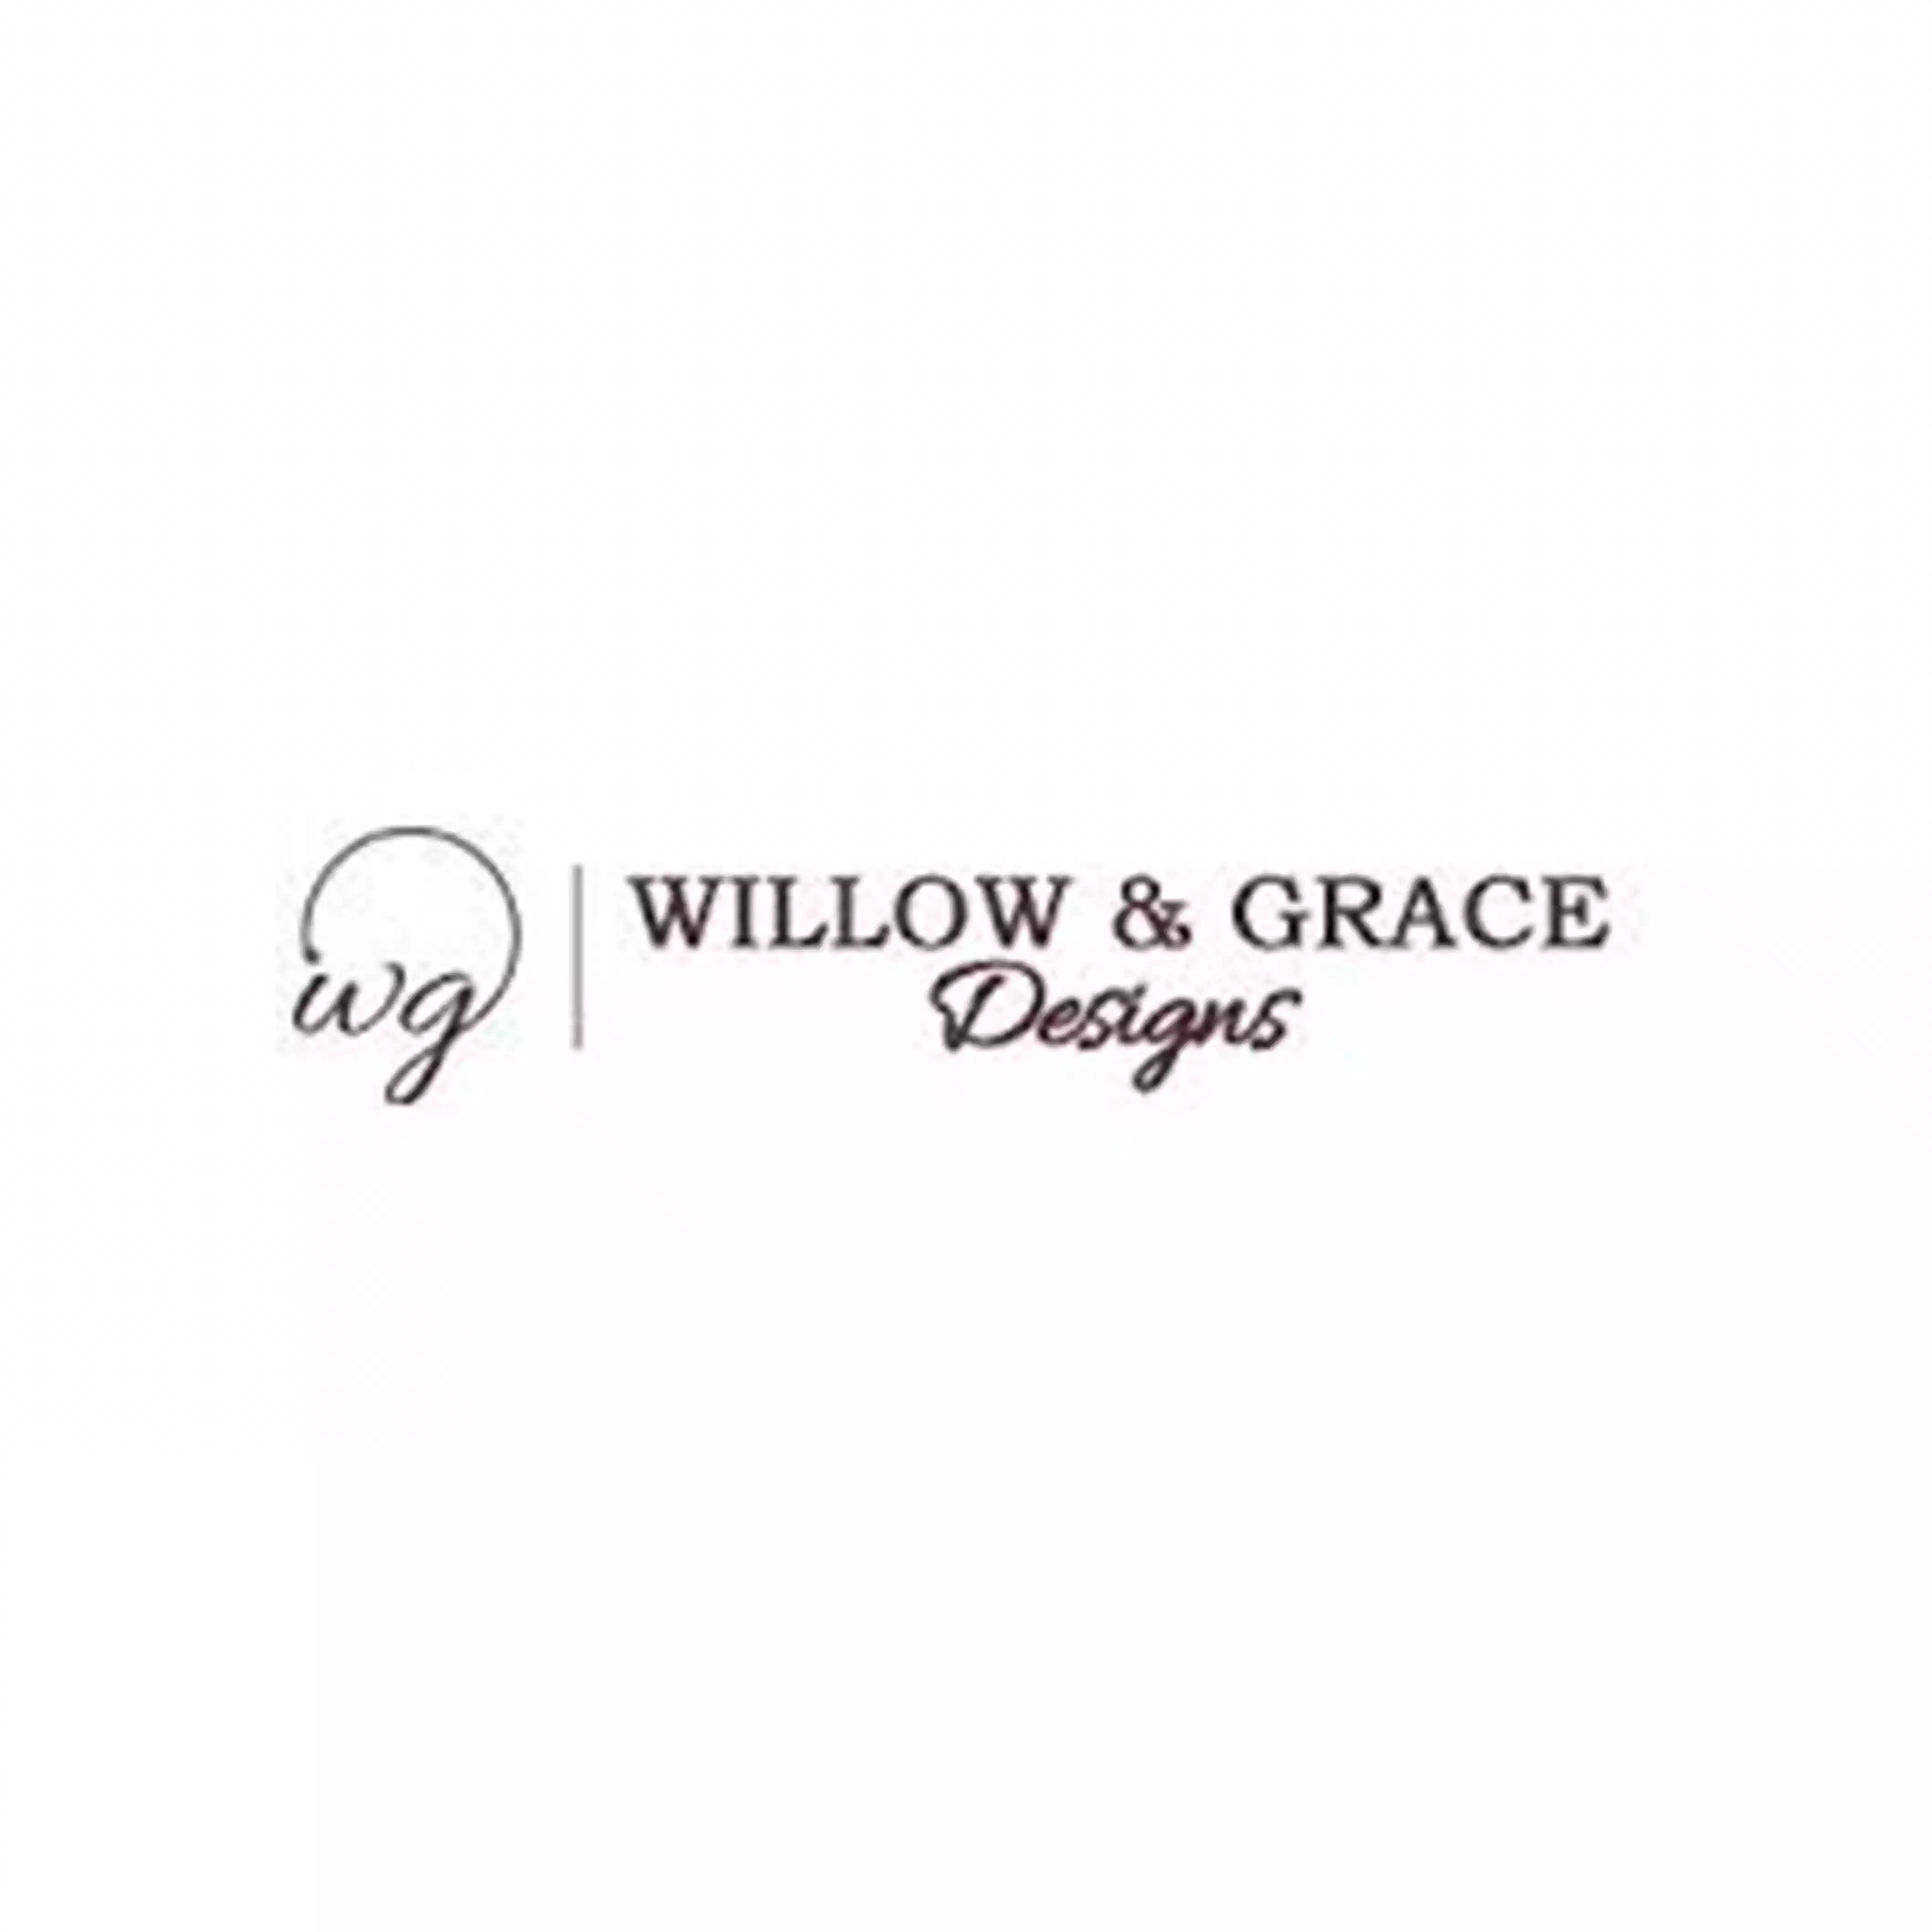 Willow and Grace Designs logo